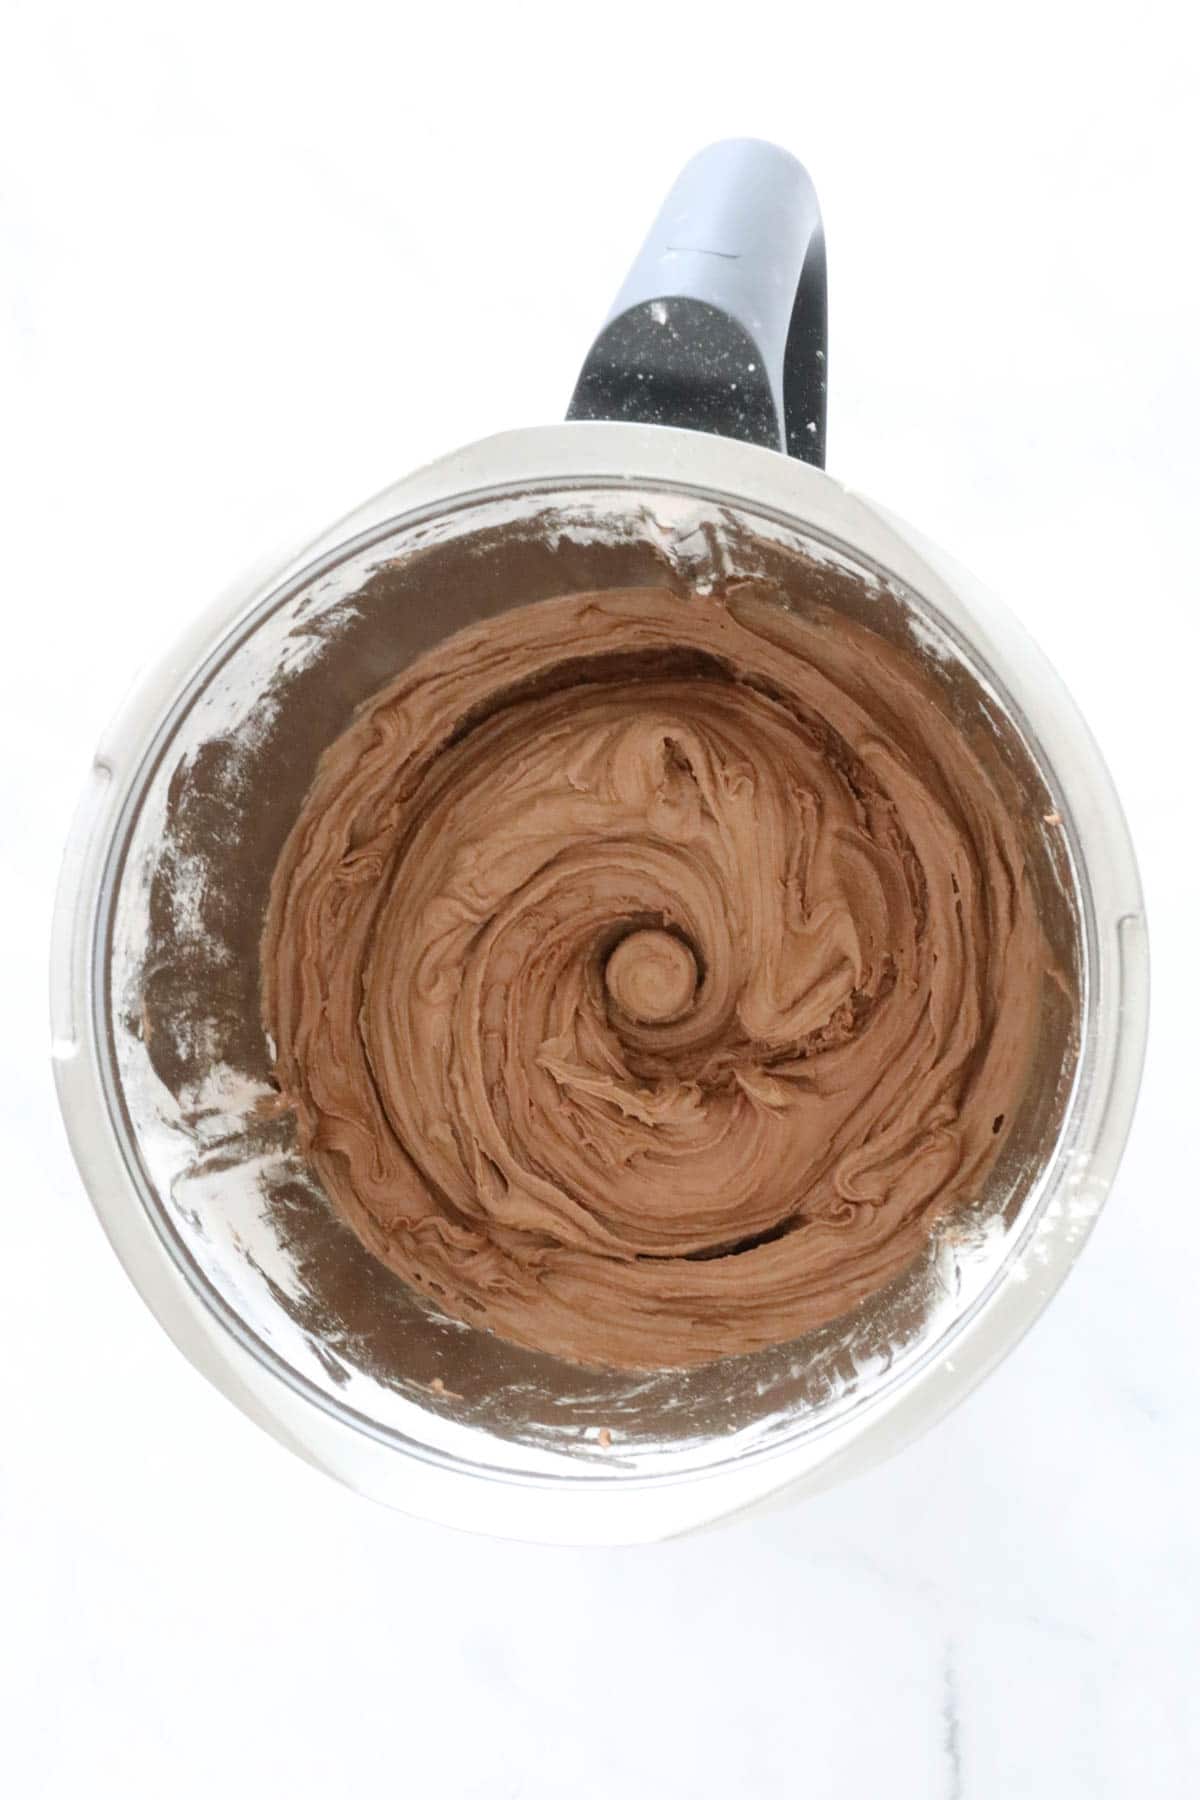 Chocolate buttercream in a Thermomix.